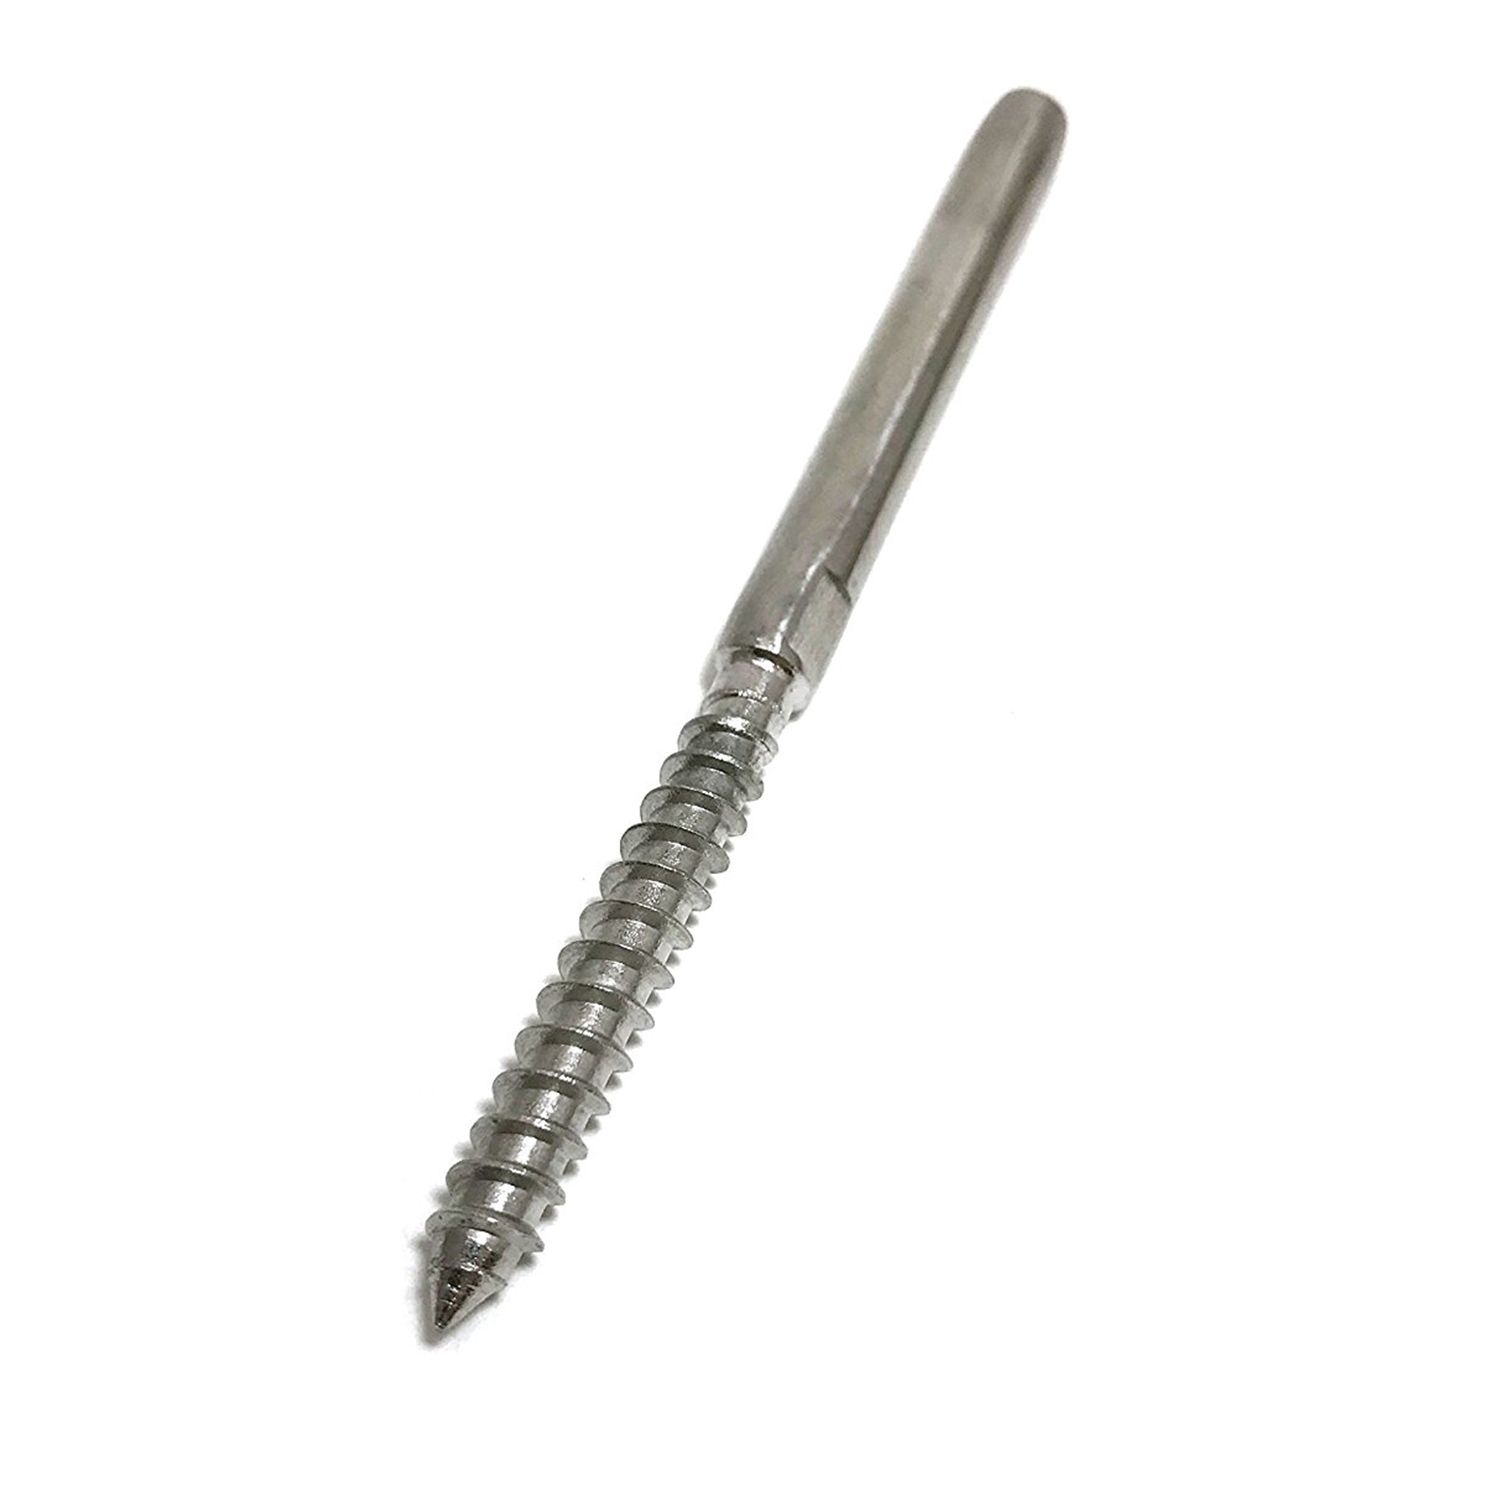 10Pcs-Lag-Screw-Hand-Crimp-Swage-Stud-for-Cable-Railing-Stainless-Steel-316-Marine-Grade-Tensioner-1322601